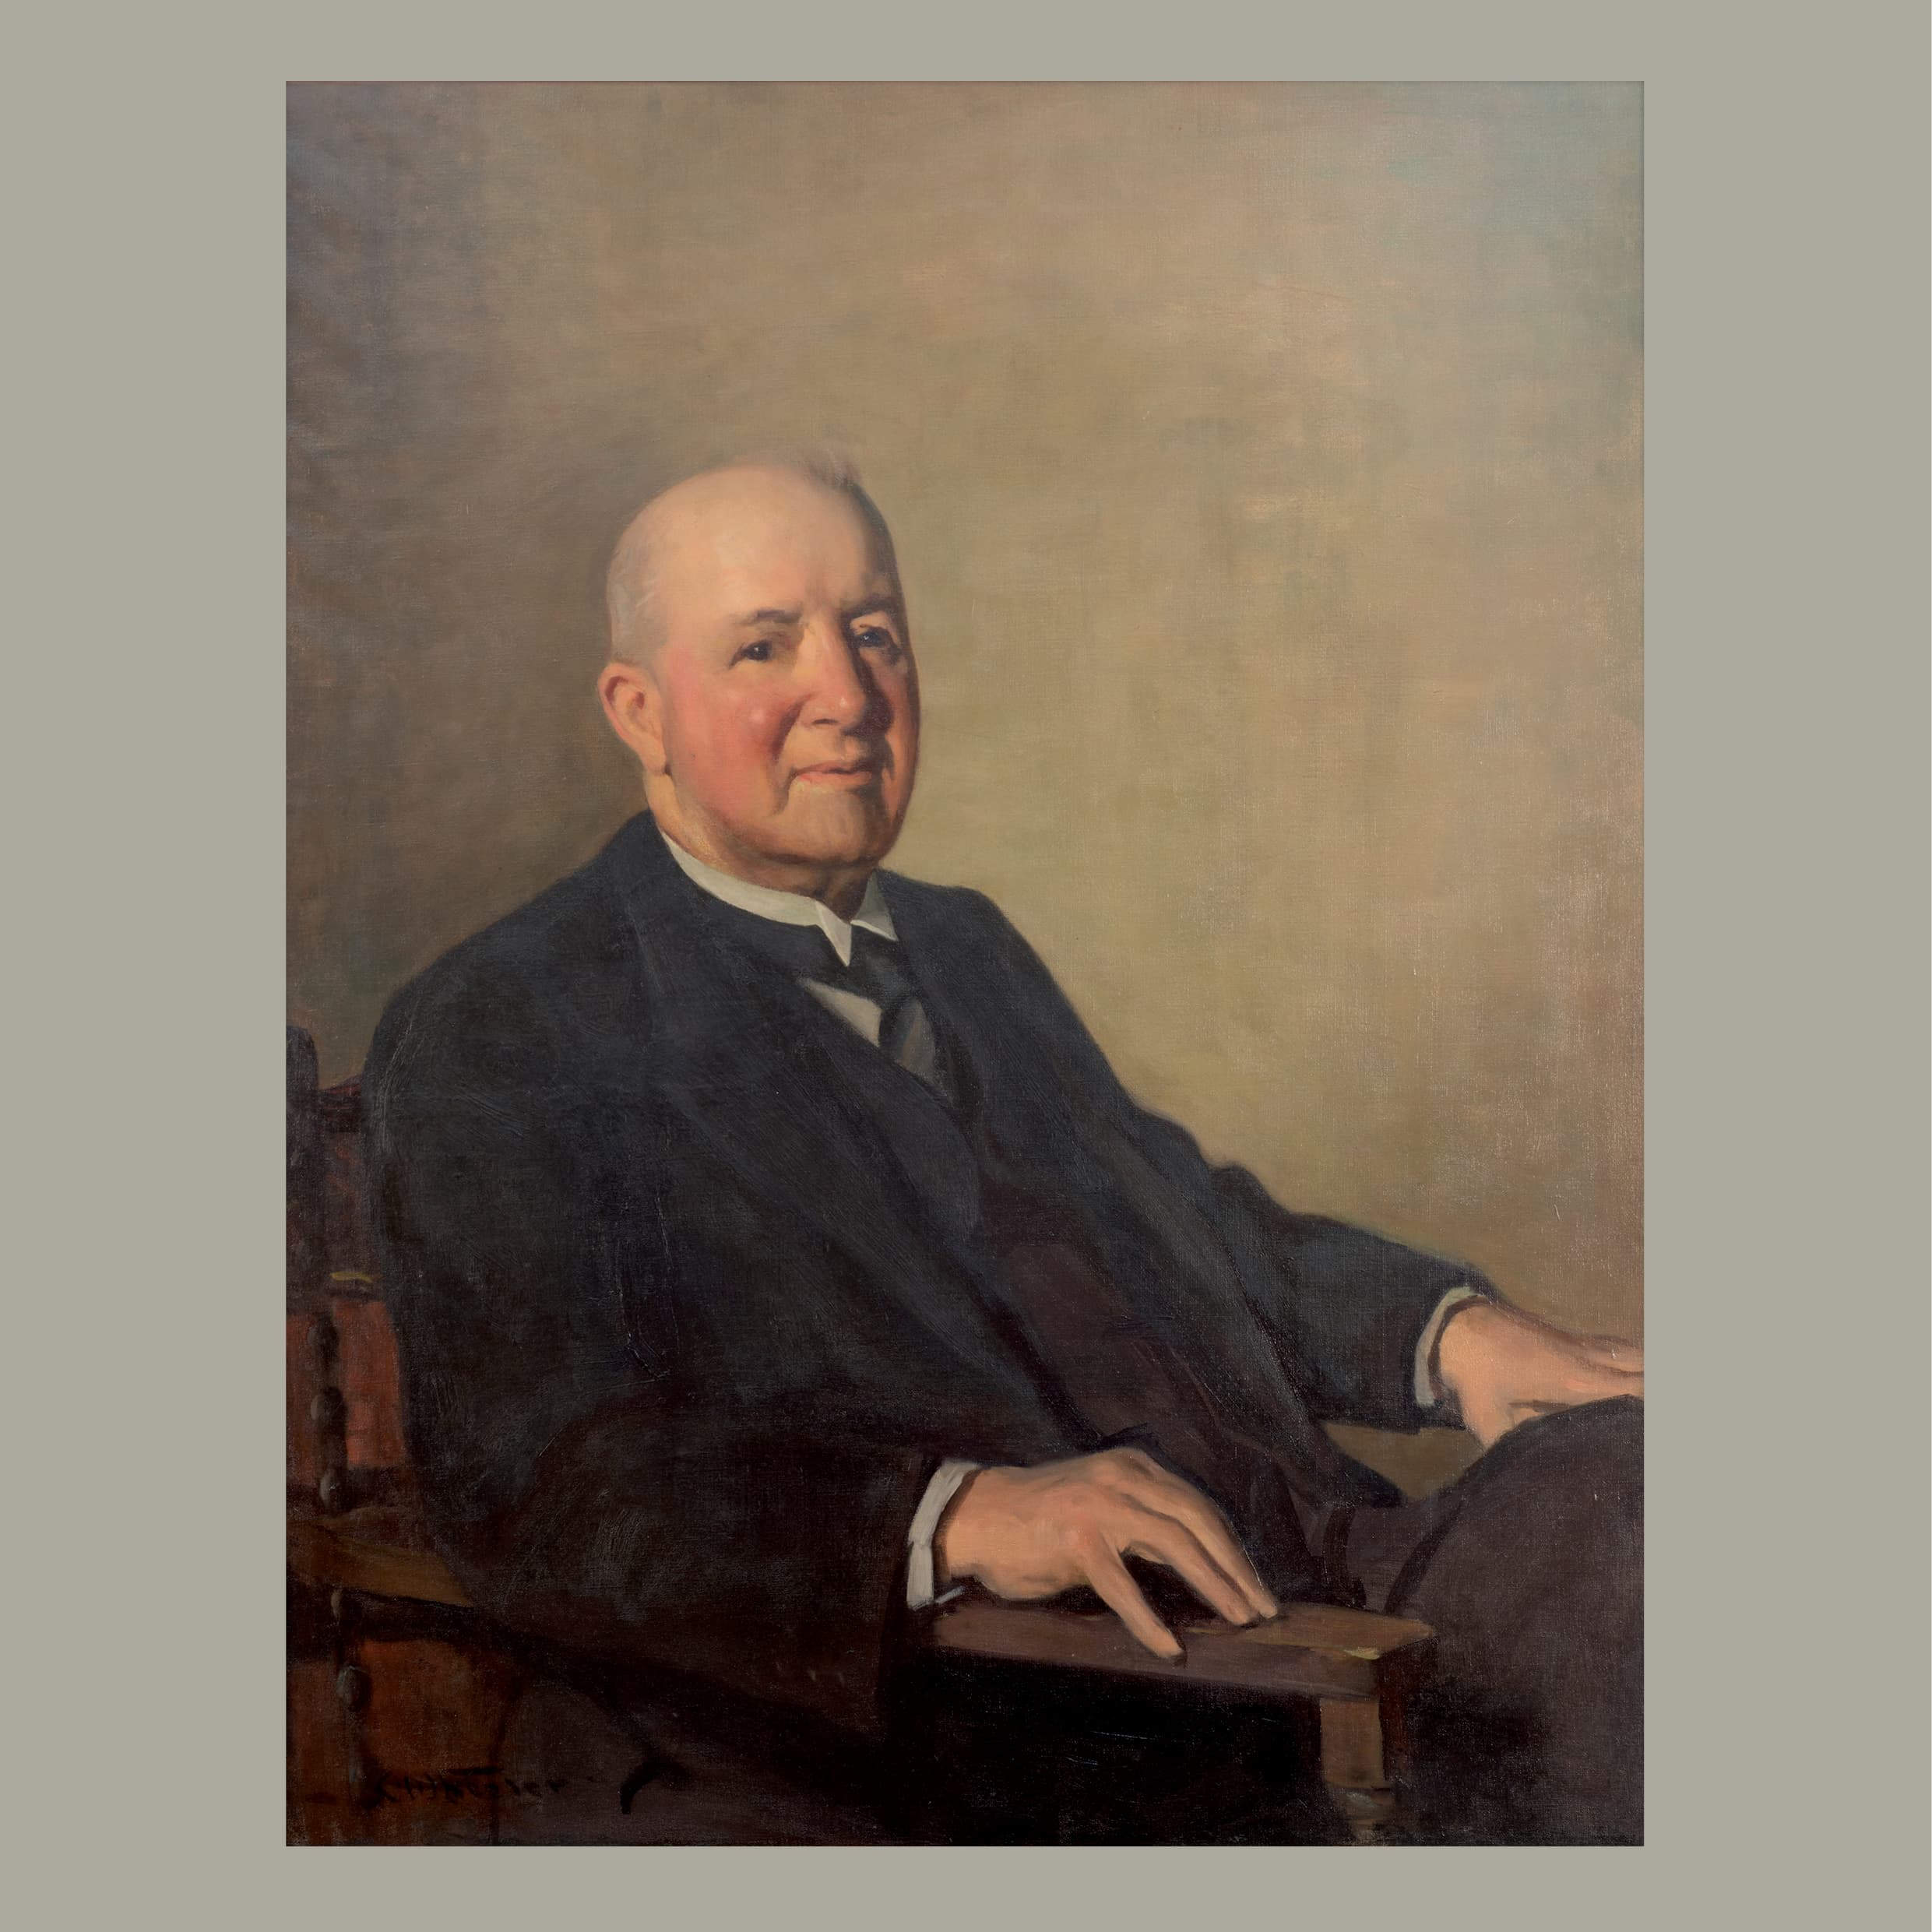 Charles Wheeler (New Zealand / Australian, 1880–1977), Ernest Joske, 1938, oil on canvas,<br><br>95.5 × 75.0. 1938.0001, gift from the dentists of Victoria to Ernest Joske 1938, and Joske to the Australian College of Dentistry, University of Melbourne Art Collection.
